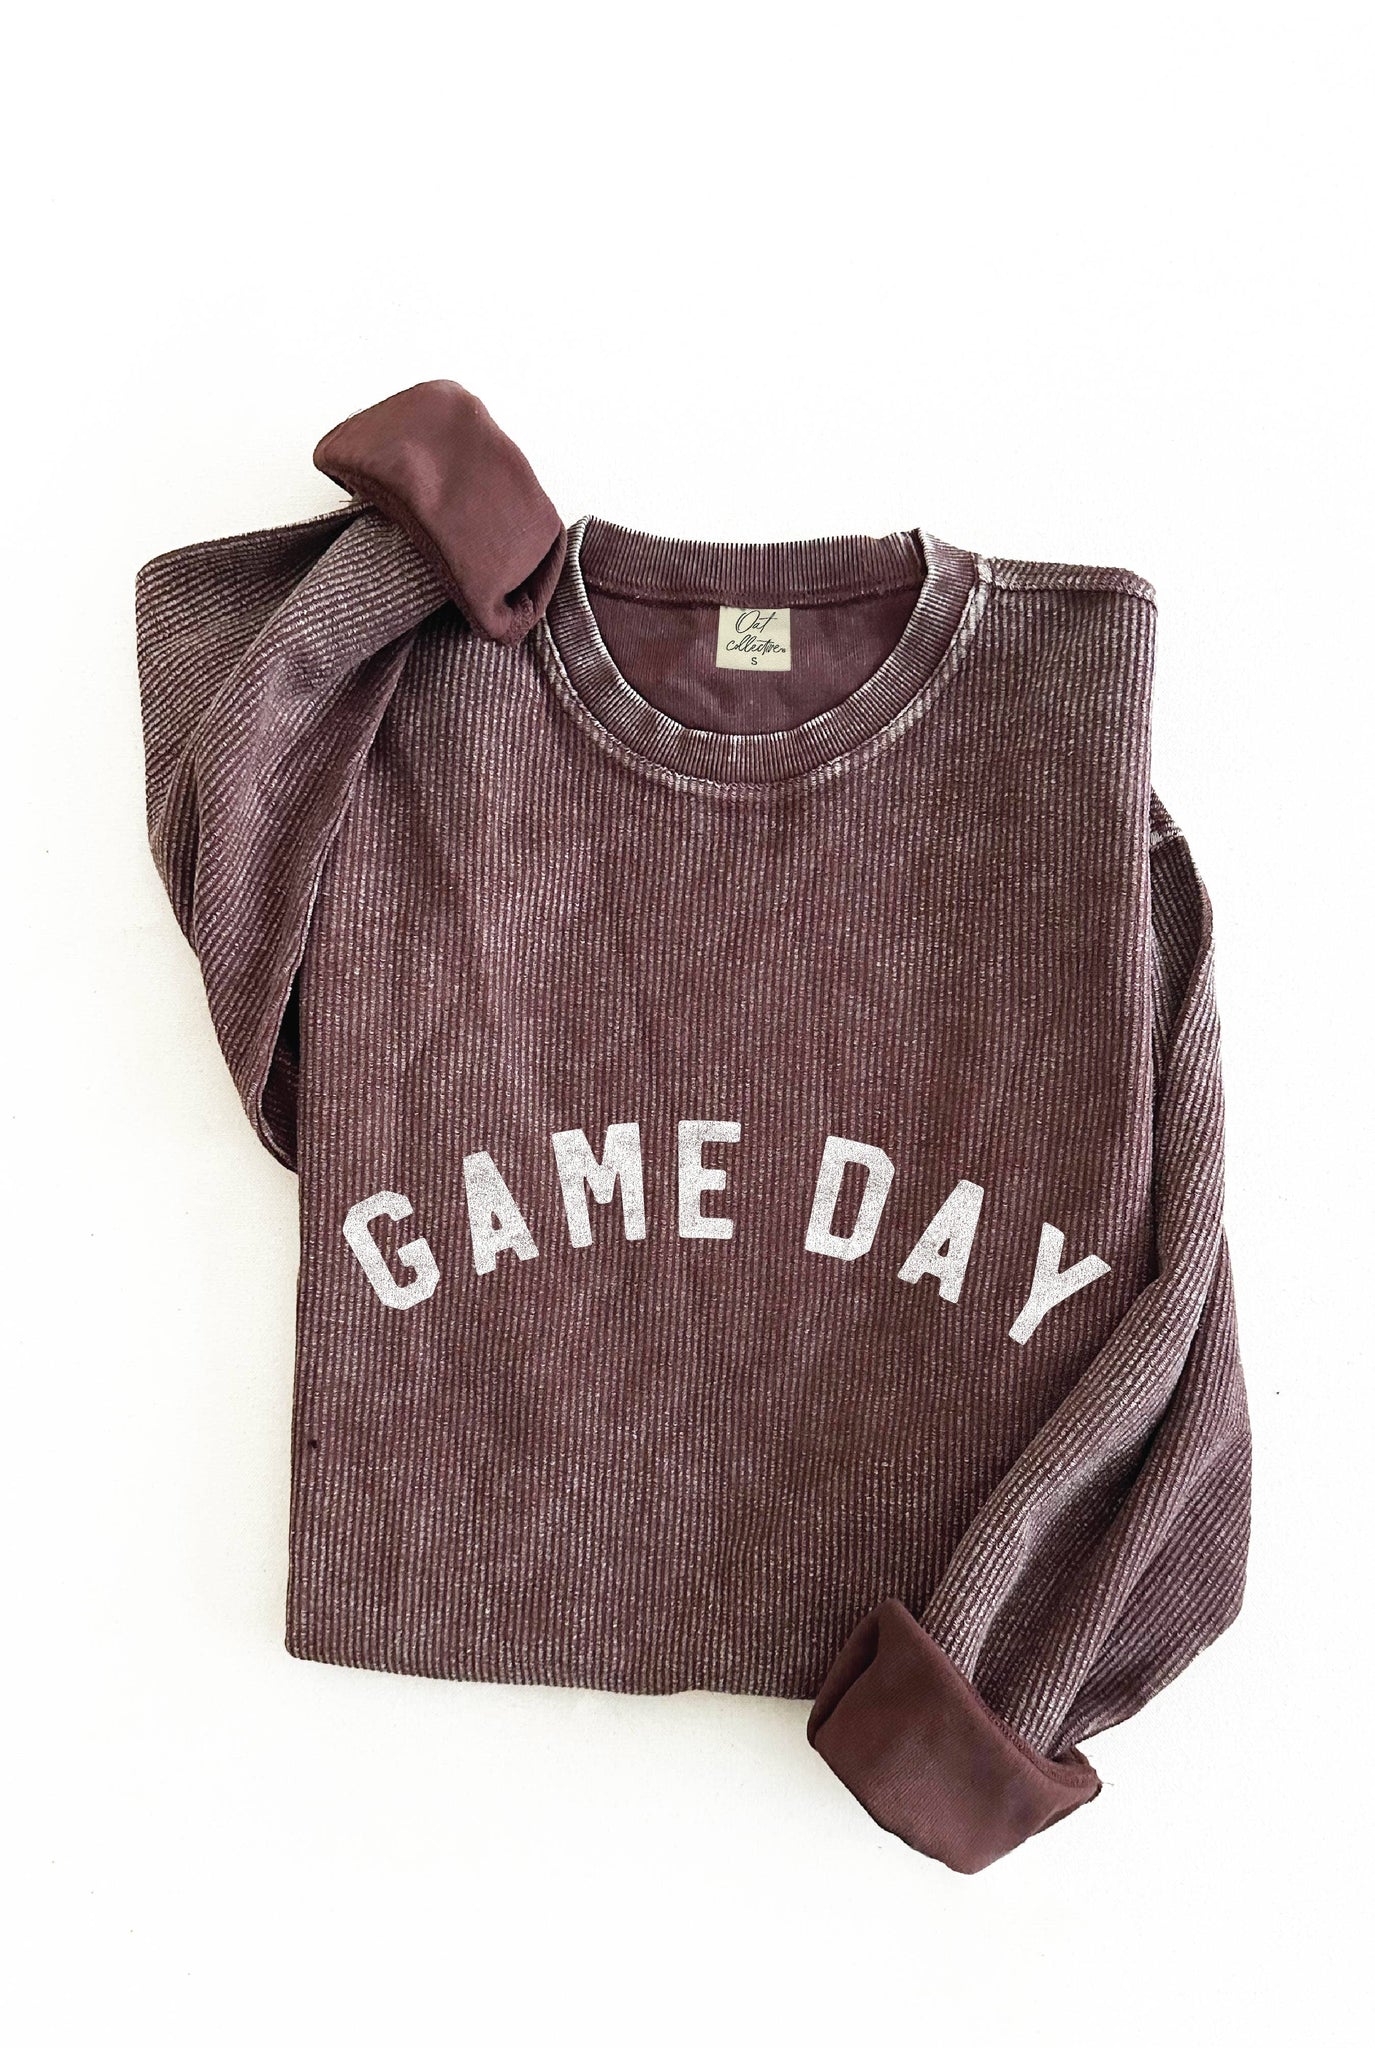 GAME DAY Plum Thermal